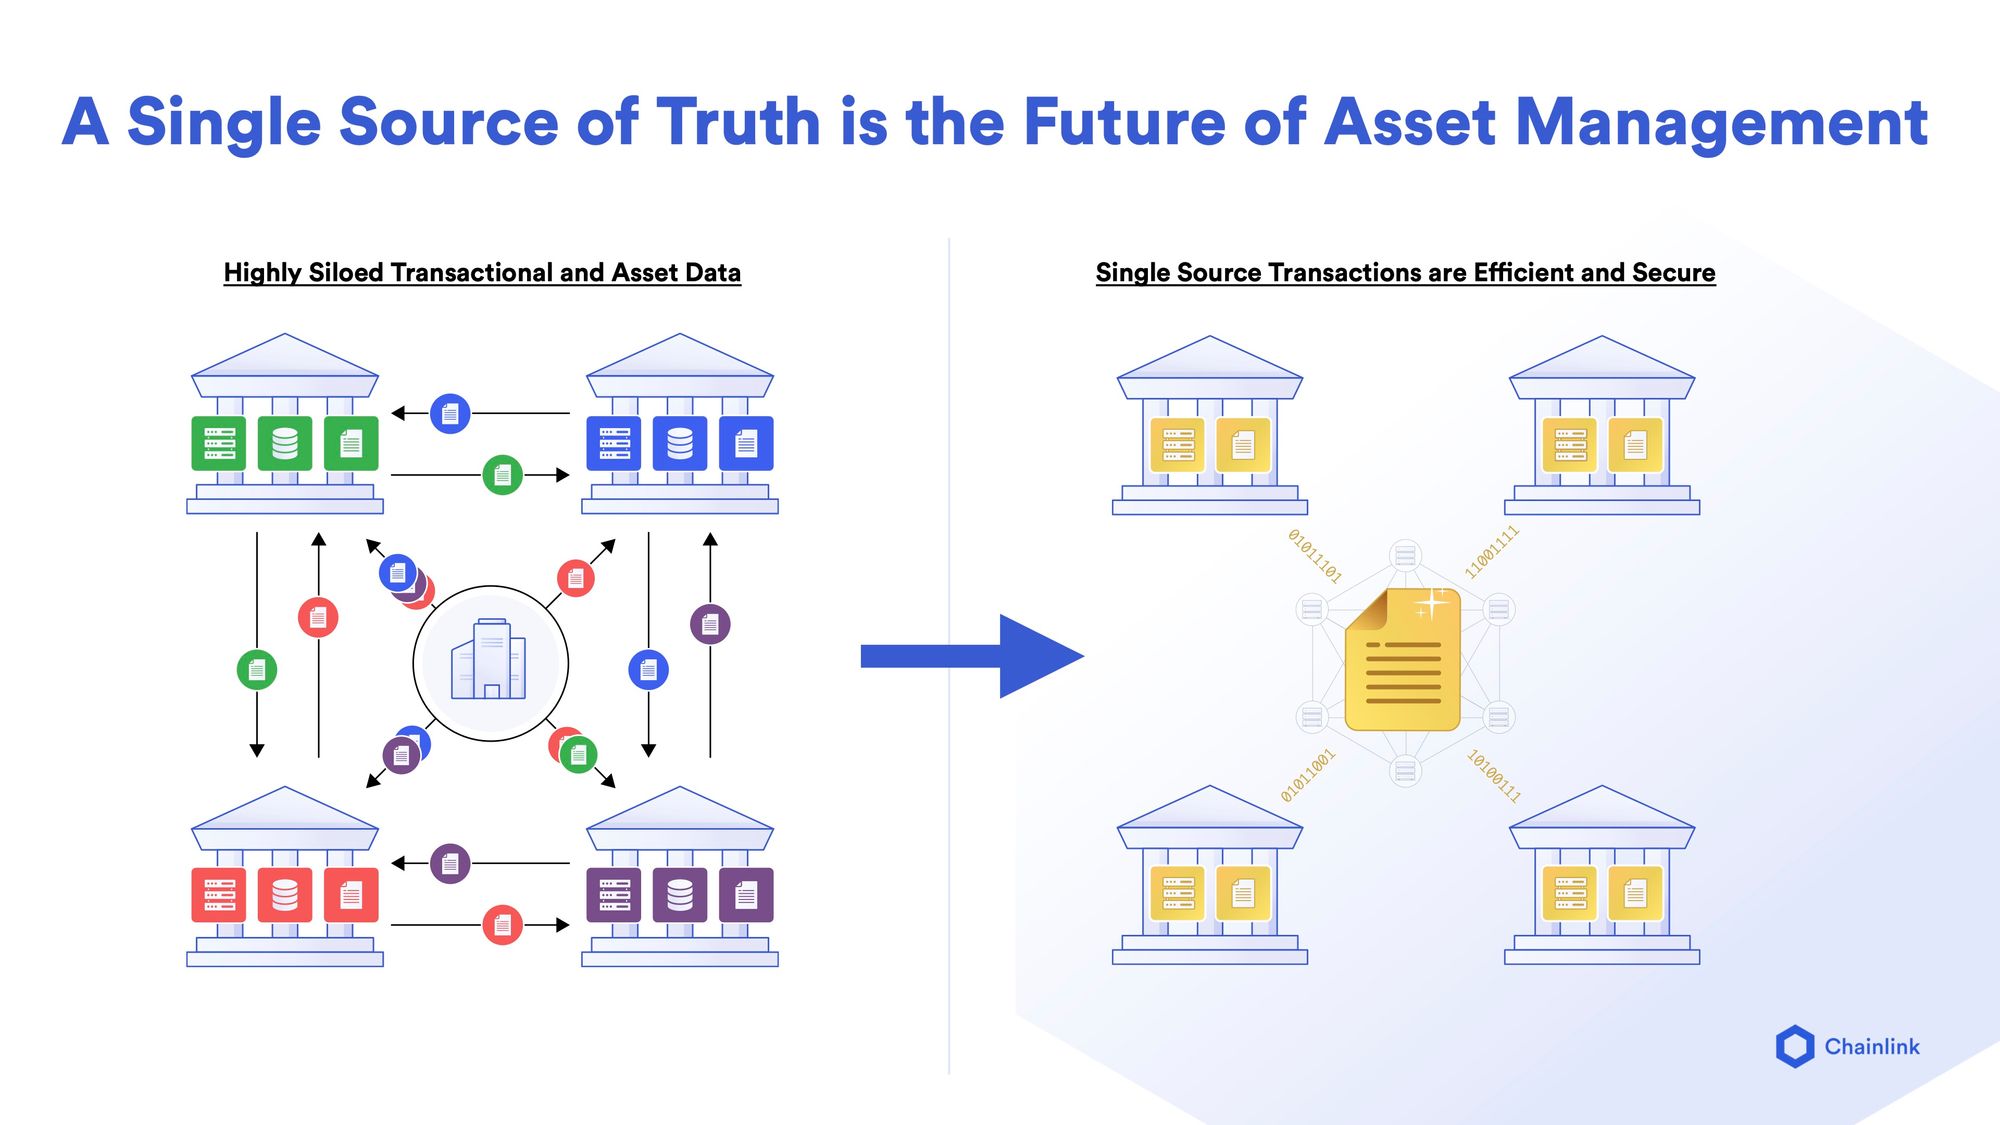 A single source of truth is the future of asset management.